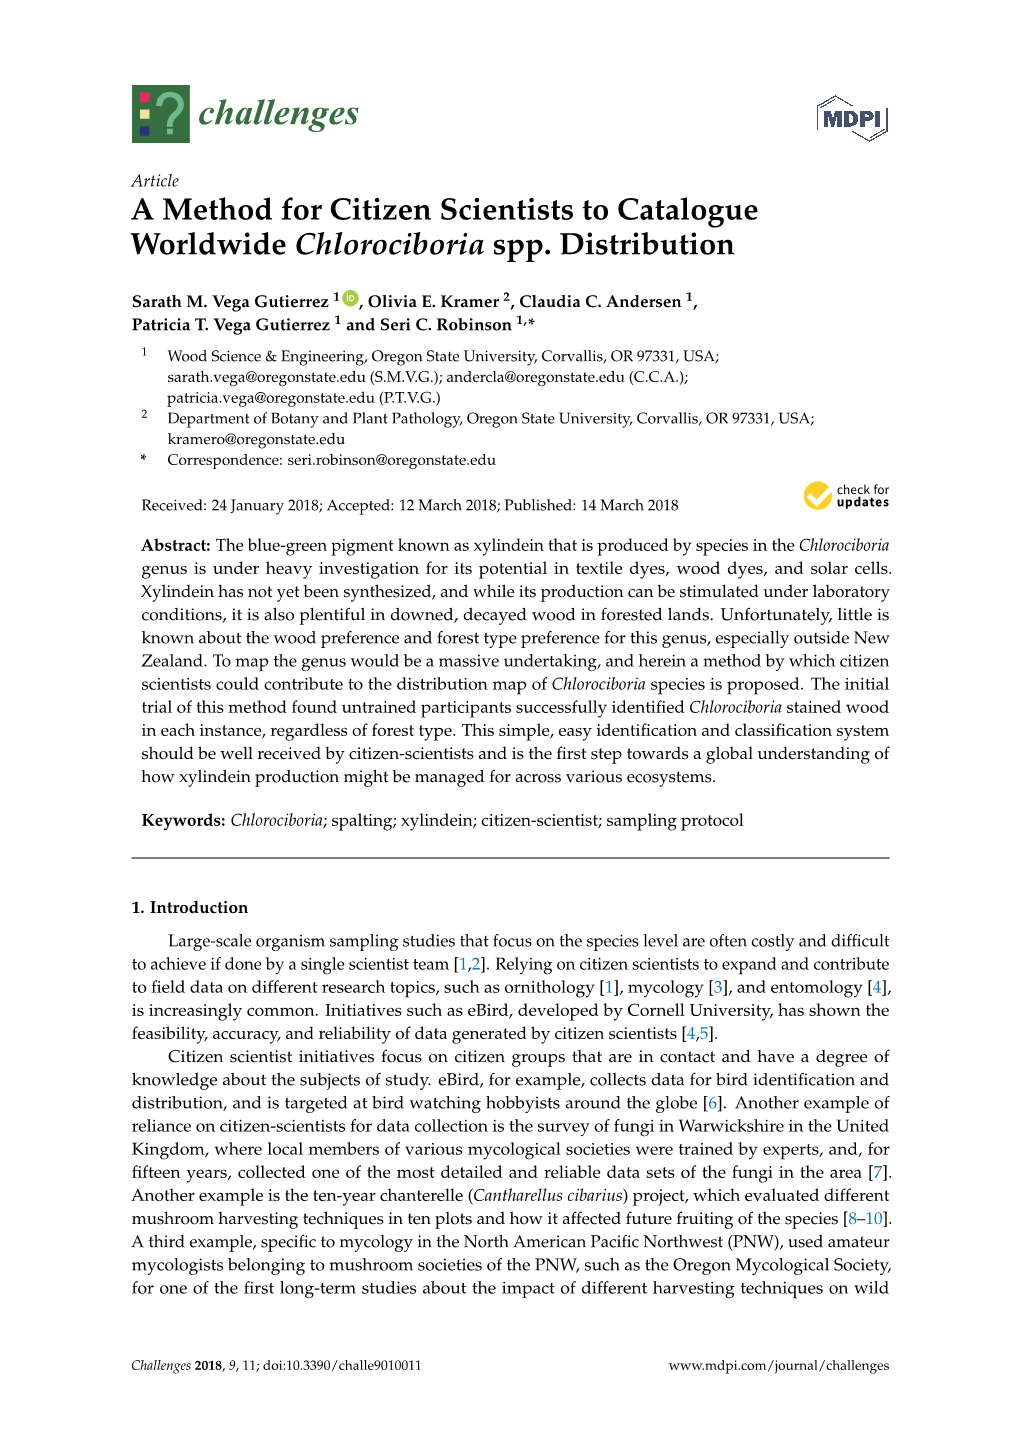 A Method for Citizen Scientists to Catalogue Worldwide Chlorociboria Spp